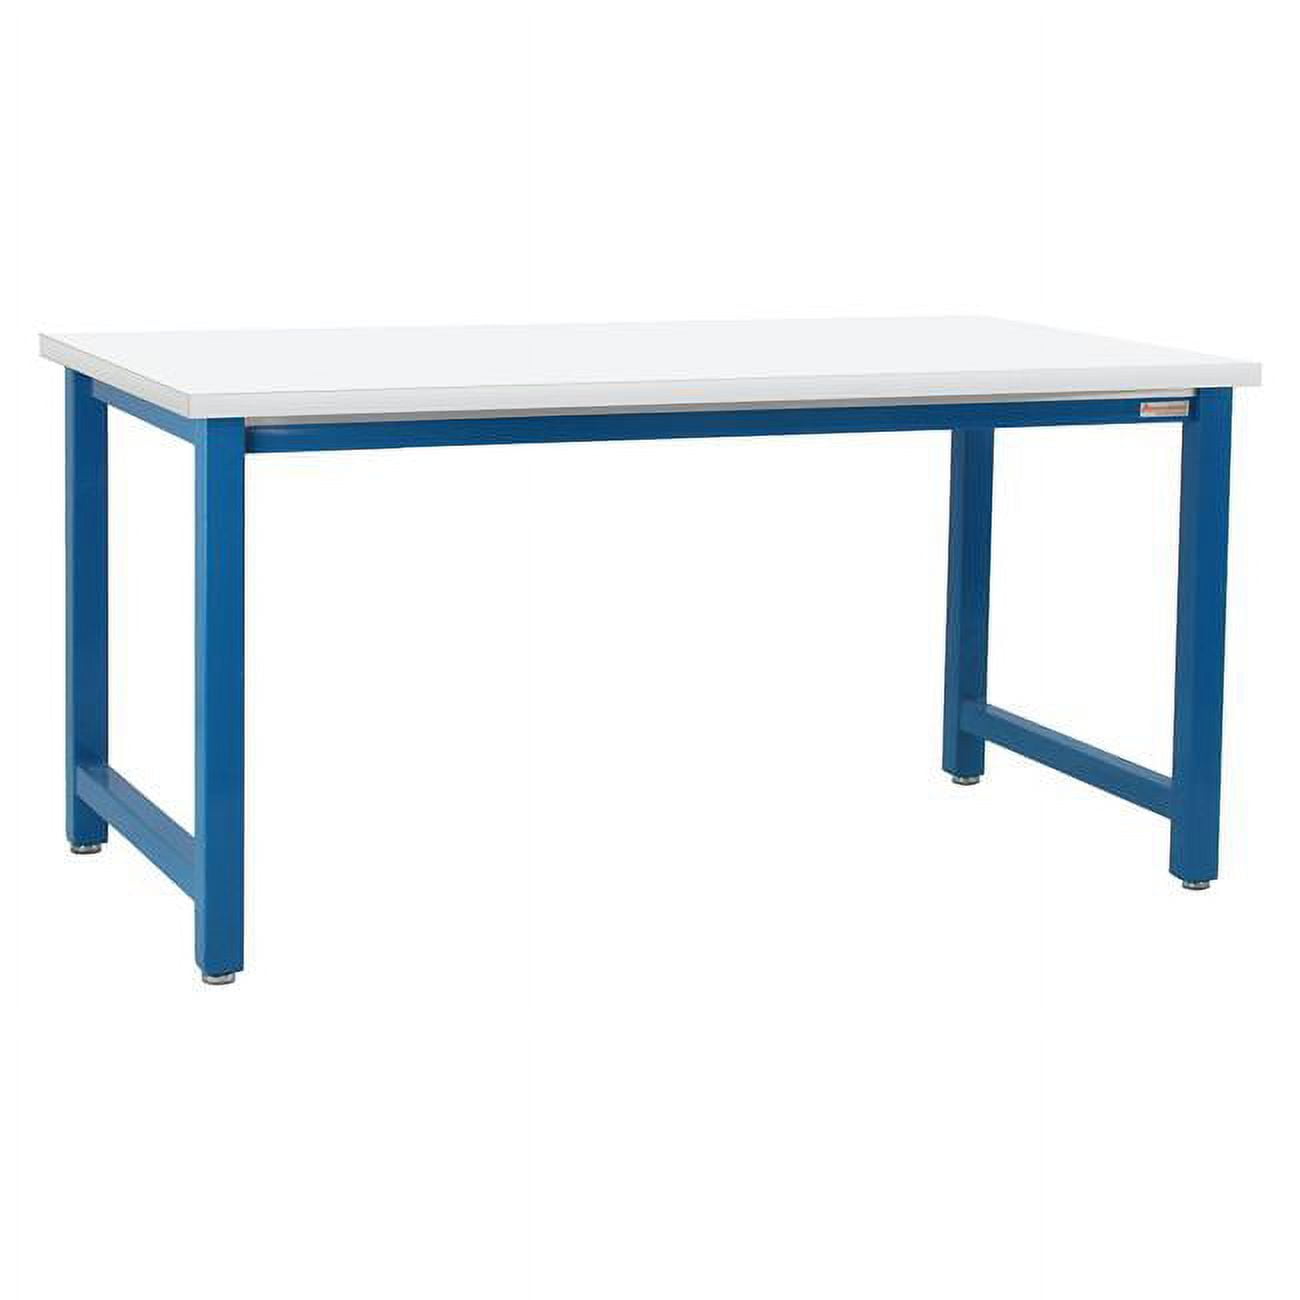 30 x 96 in. Kennedy Workbenches with Formica Laminate & Square Cut Edge Top, Light Blue -  KD Gabinetes, KD2803547